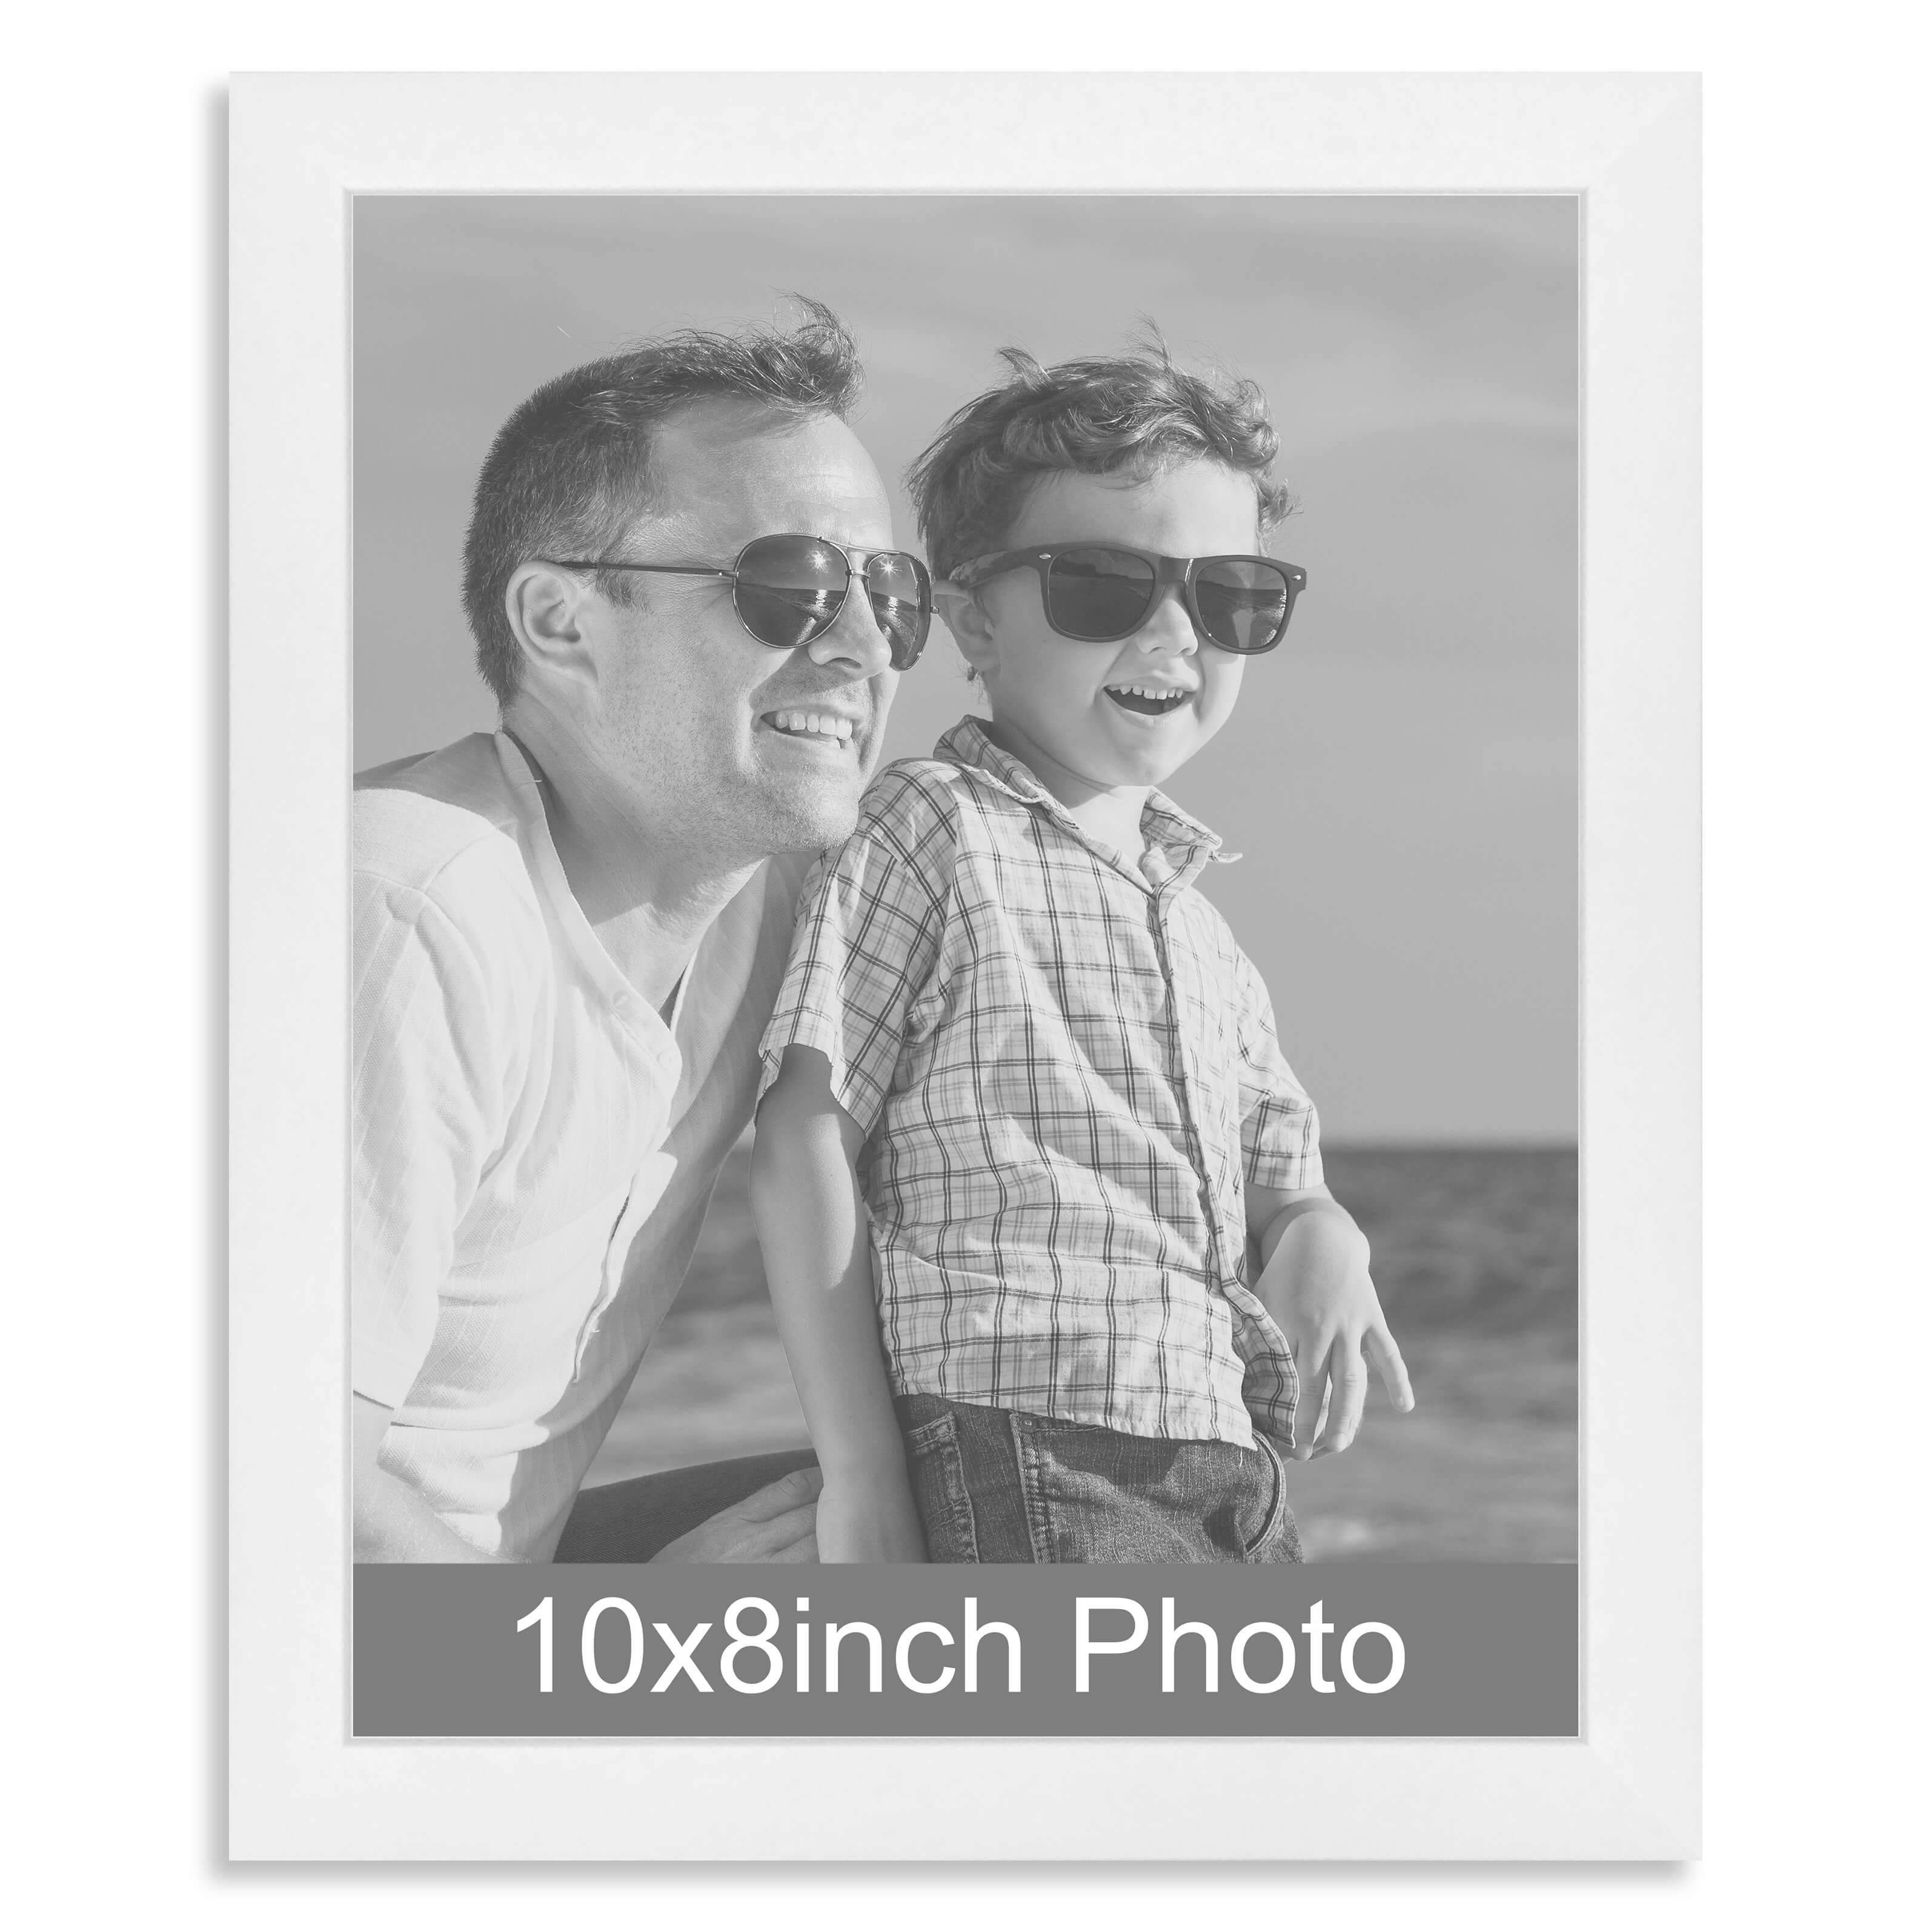 10 x 8inch White Wooden Photo Frame for a 10×8/8x10in image – Photo uploaded below (select Choose File)